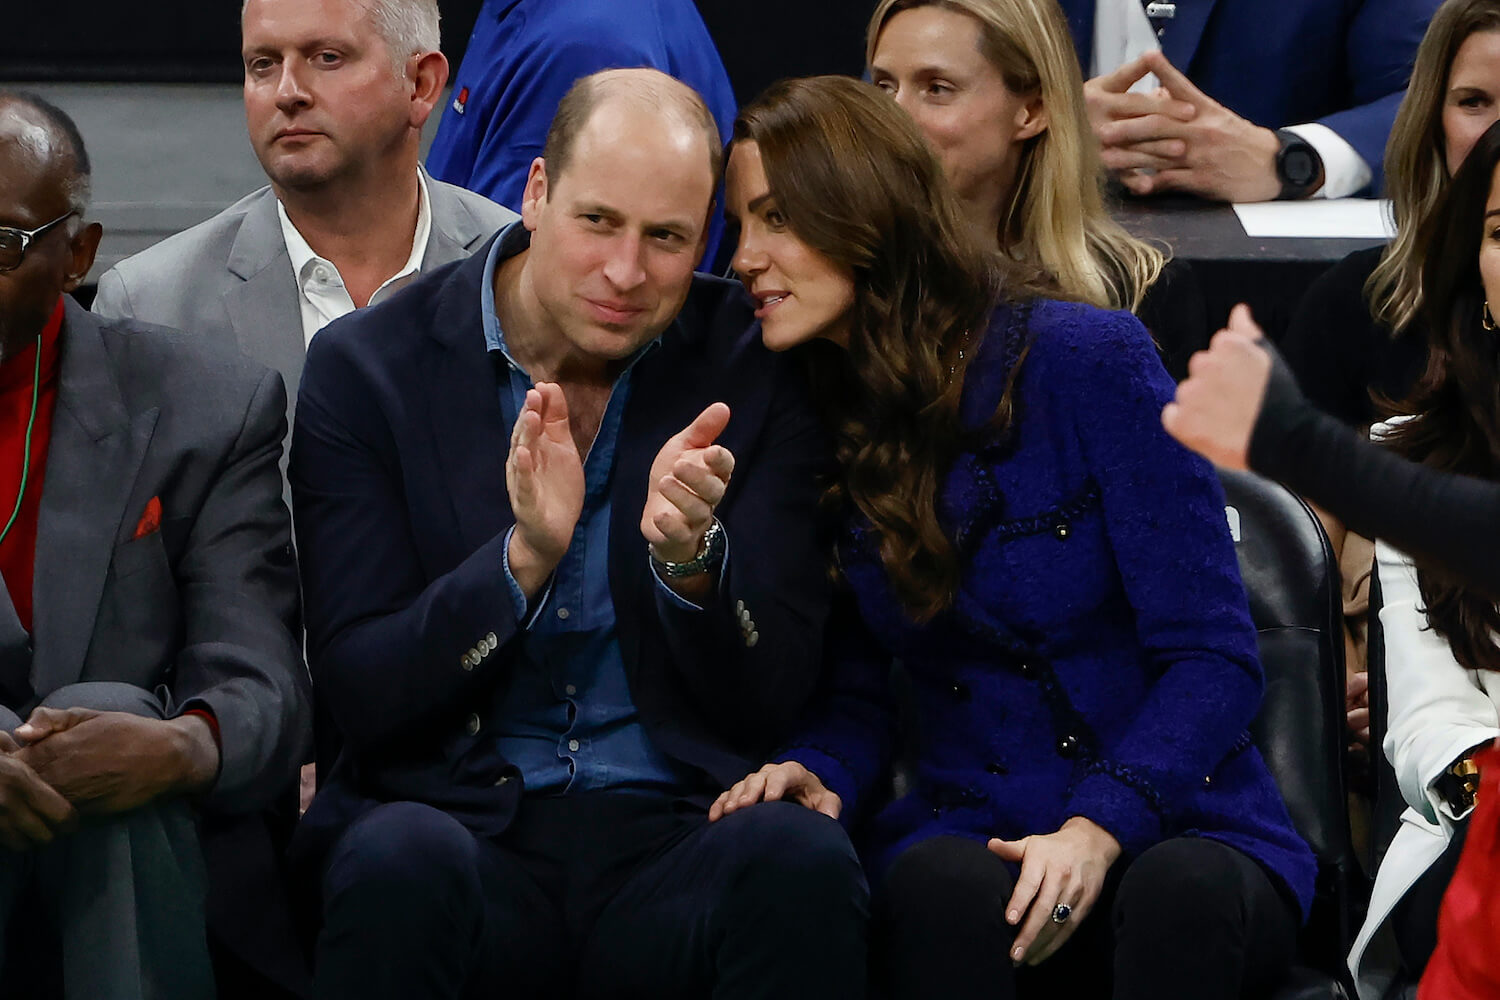 Prince William and Kate Middleton share a flirty moment at a Boston Celtics game